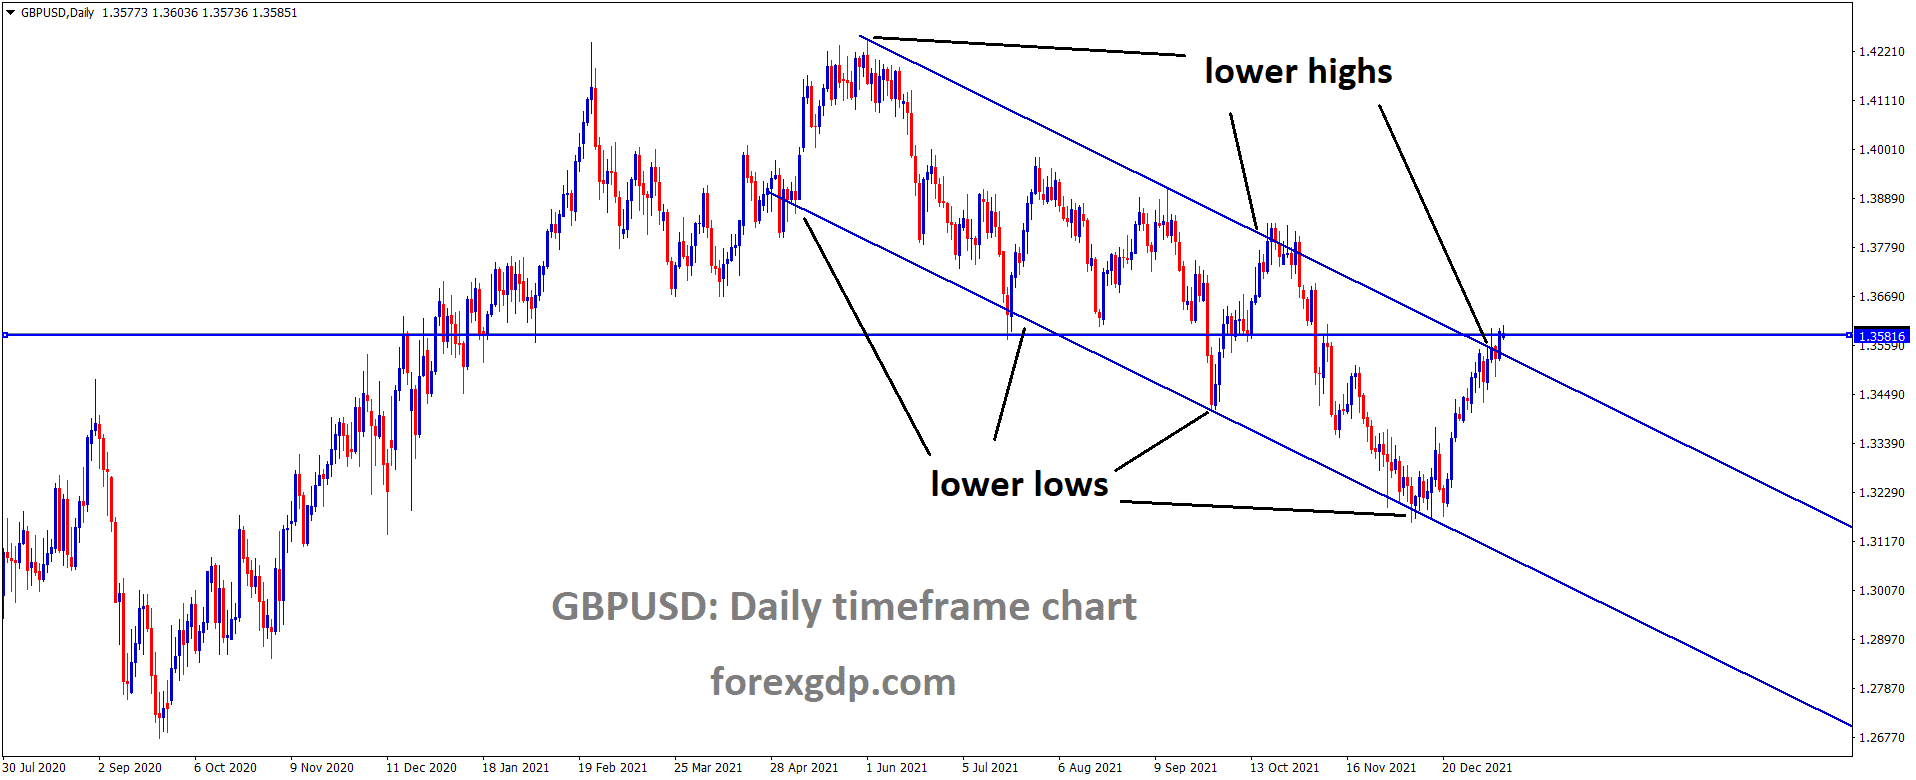 GBPUSD is moving in the Descending channel and the market has reached the lower high area of the channel 3